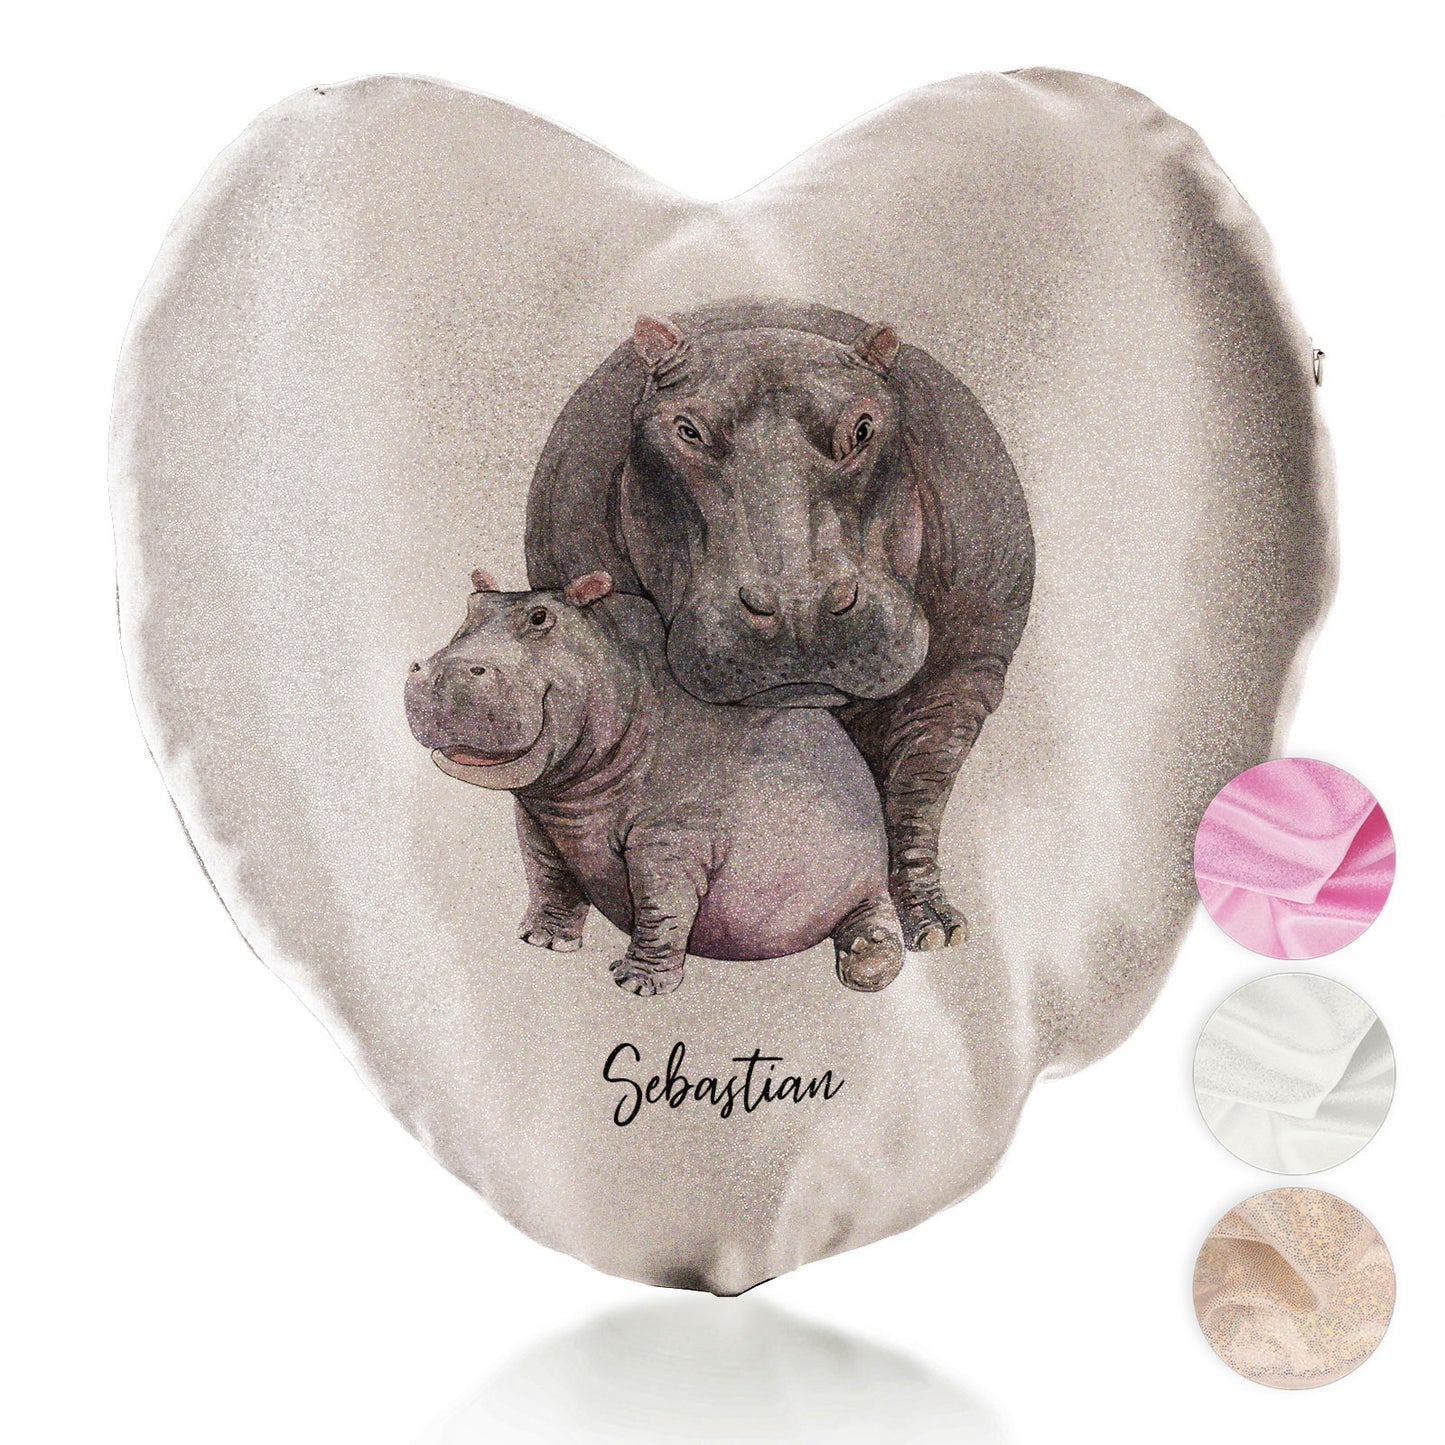 Personalised Glitter Heart Cushion with Welcoming Text and Embracing Mum and Baby Hippos